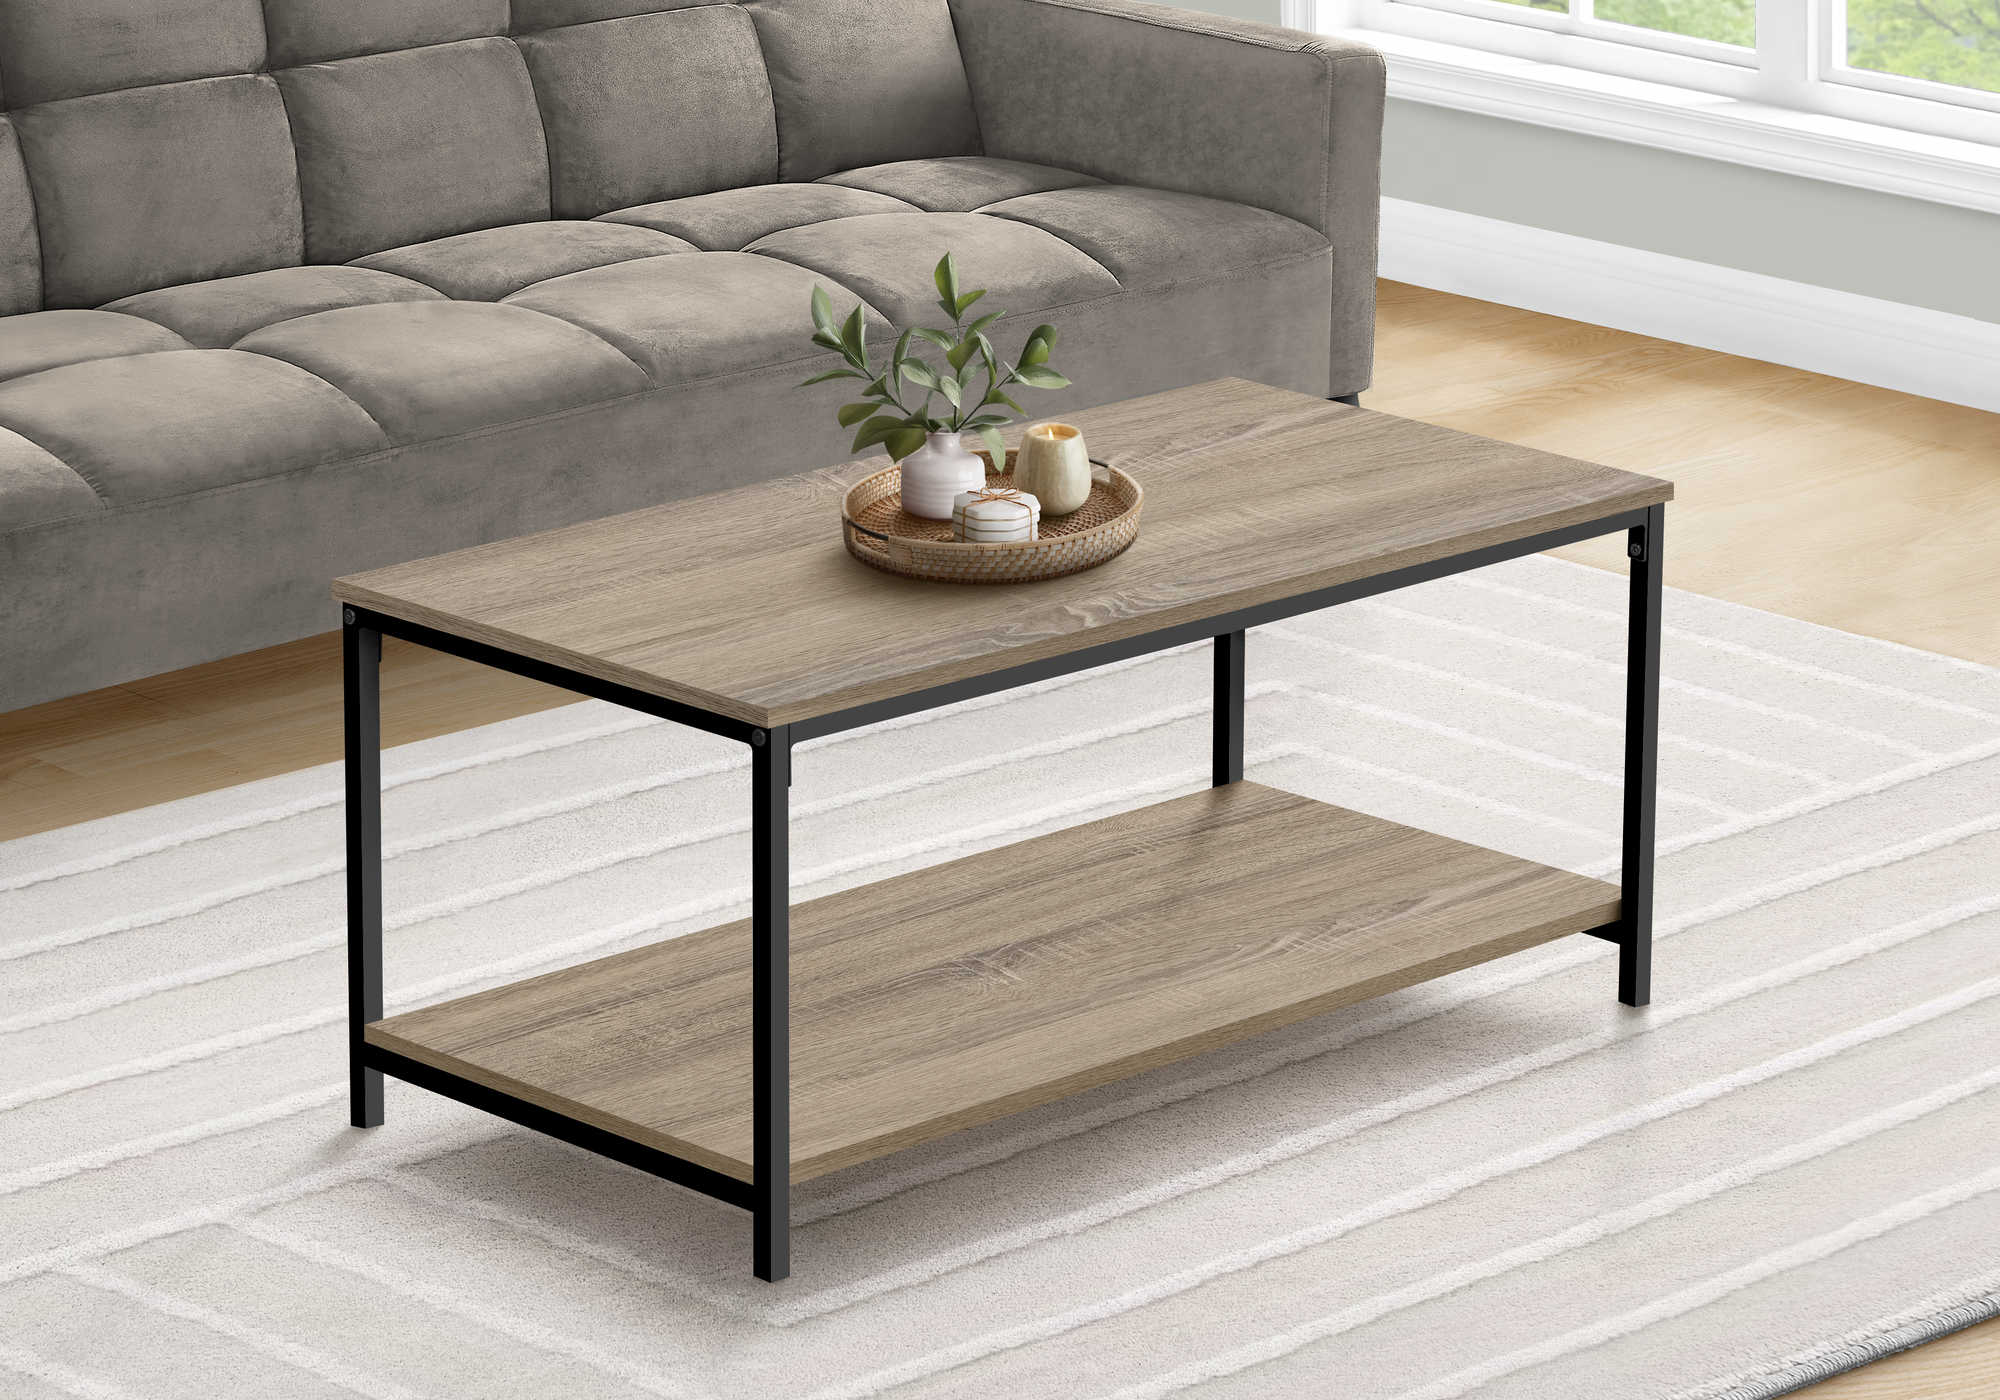 I 3802 - COFFEE TABLE - 40"L / DARK TAUPE / BLACK METAL BY MONARCH SPECIALTIES INC